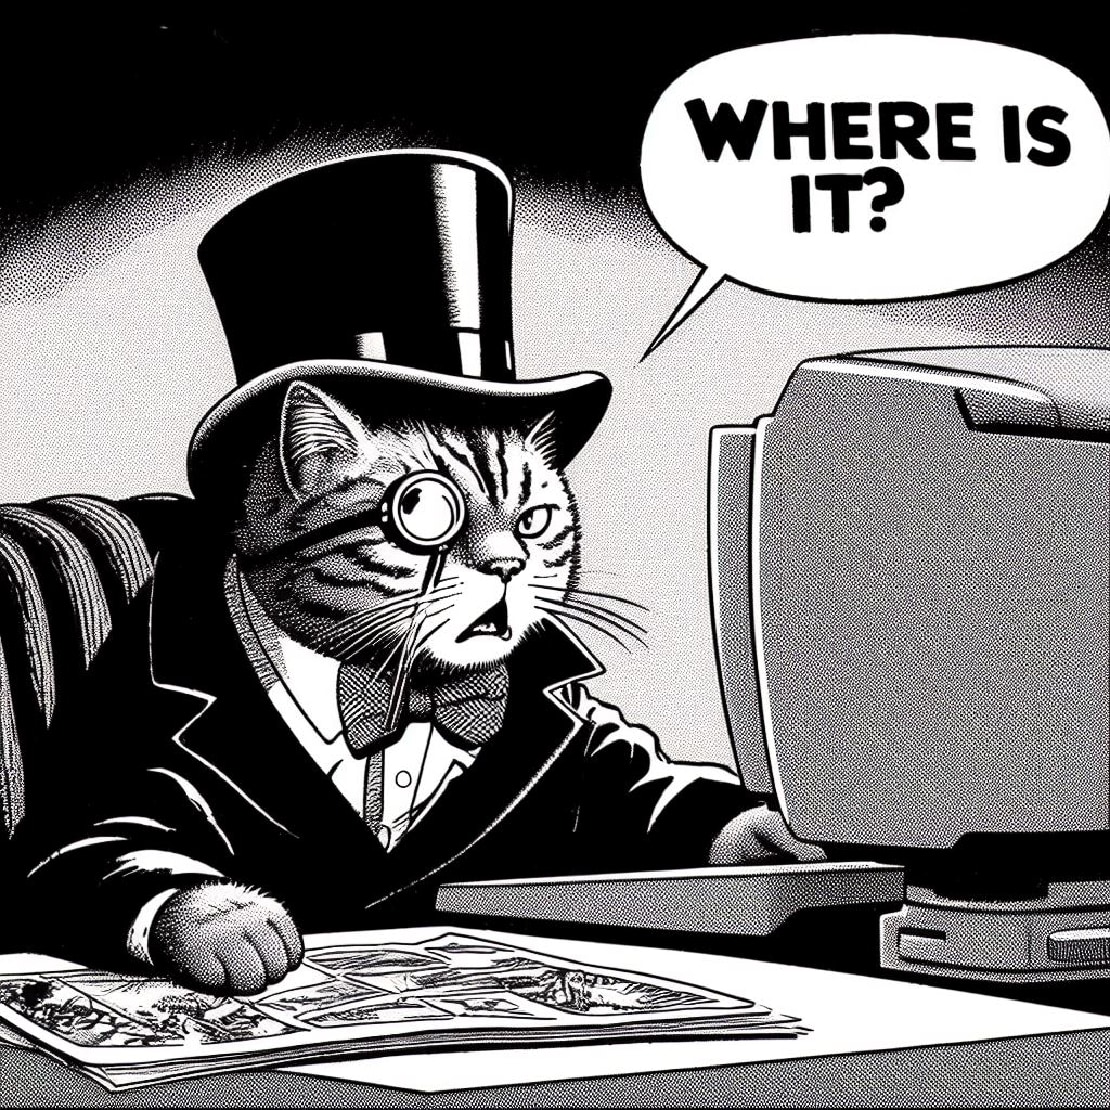 A cat wearing a top hat, sat behind a computer and asking, 'Where is it?'